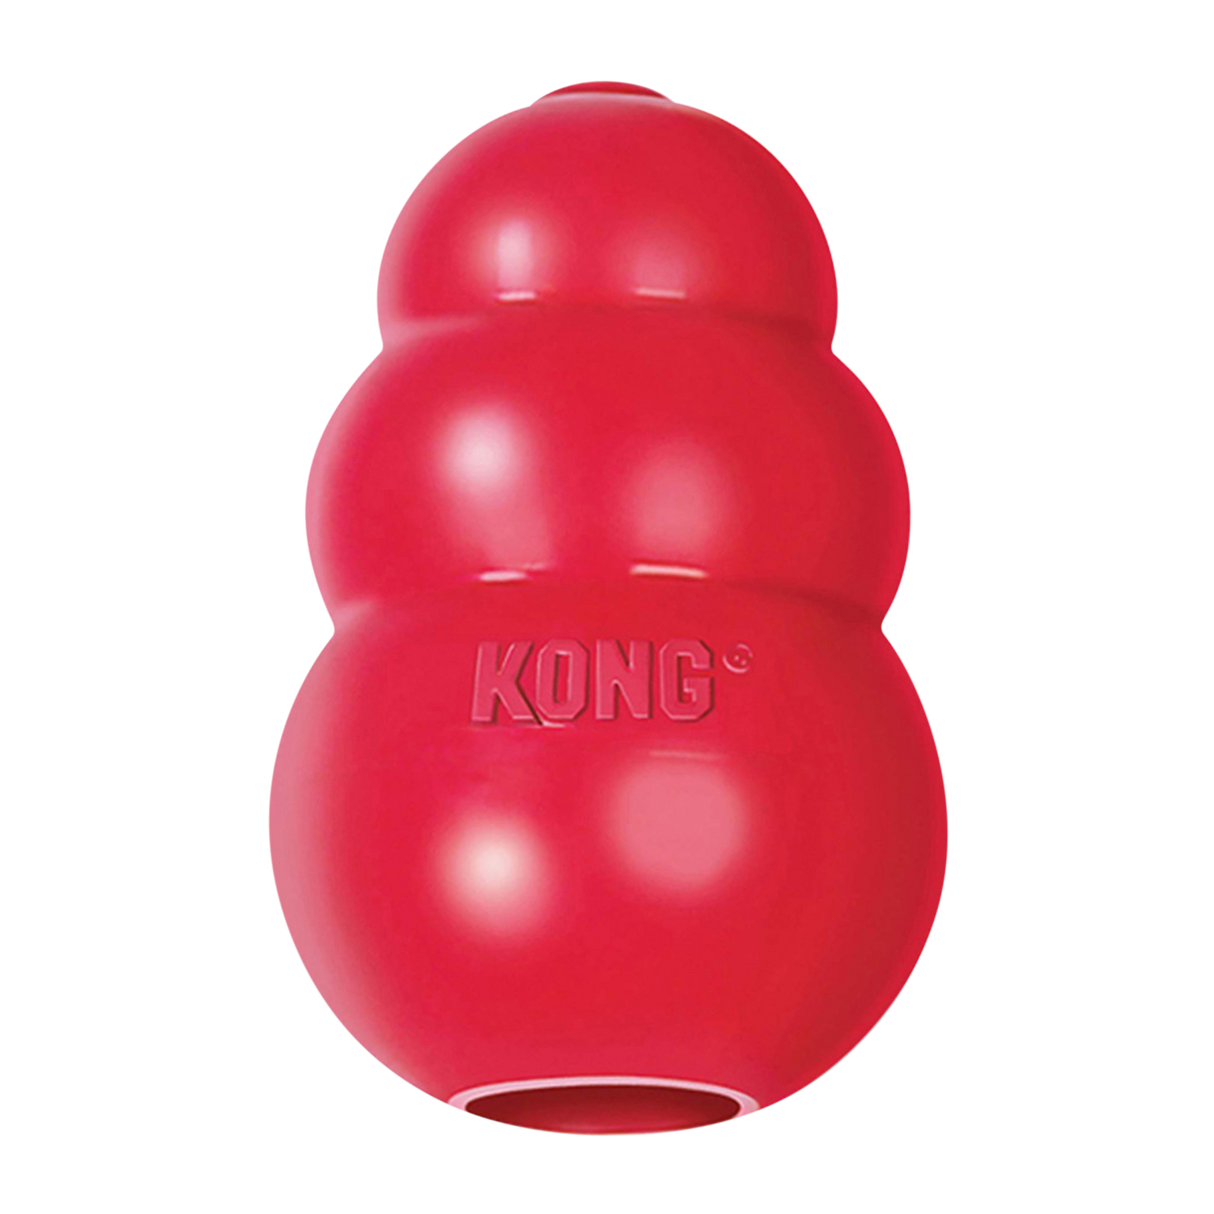 KONG Classic #size_s